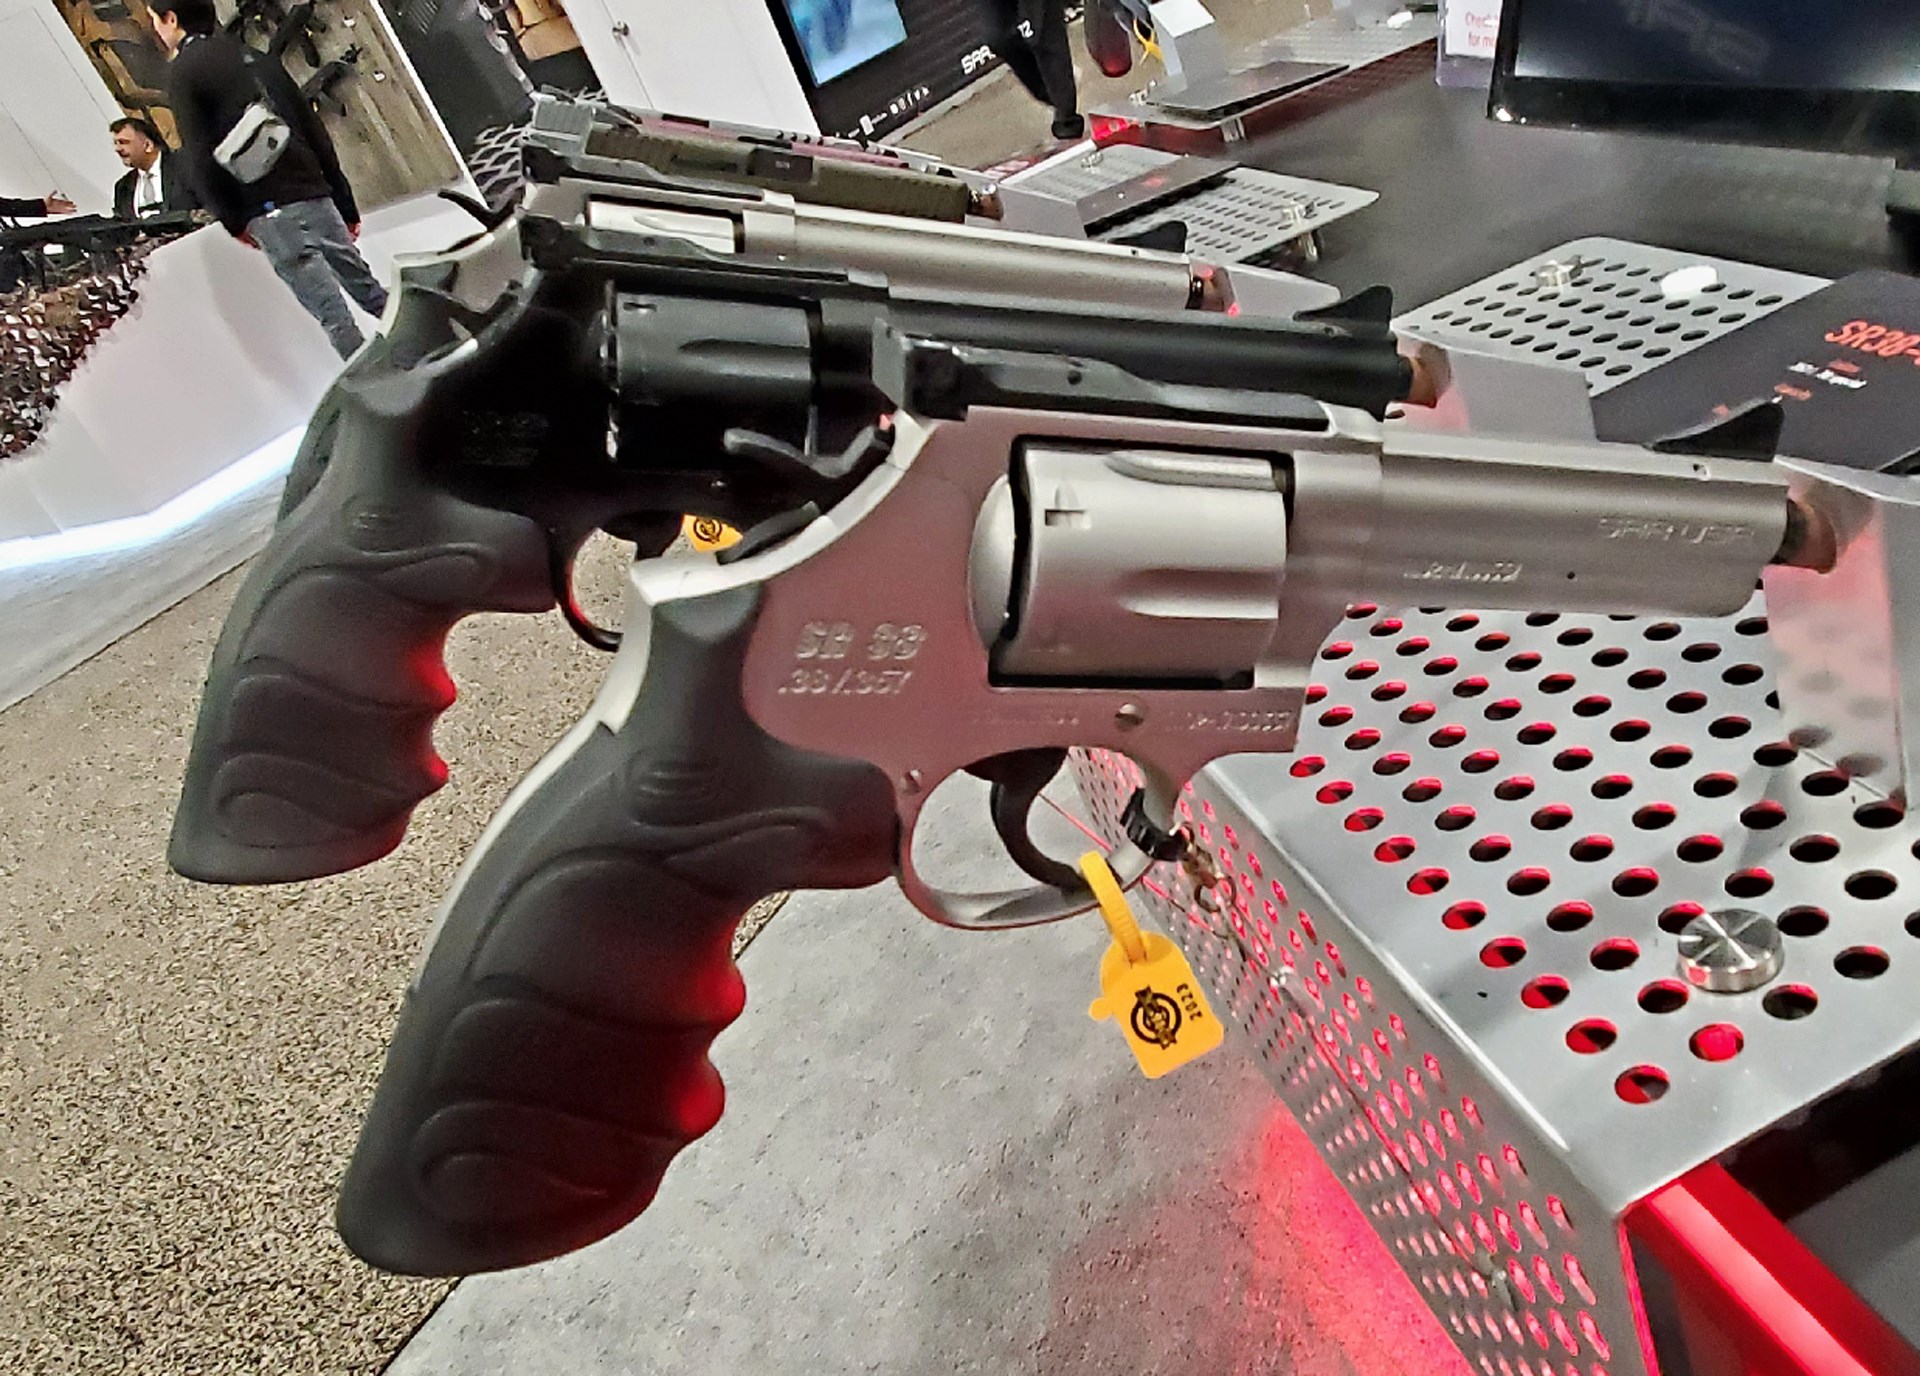 SAR USA SR-38 revolver optic-ready double-action wheelgun shown with other guns in background at tradeshow